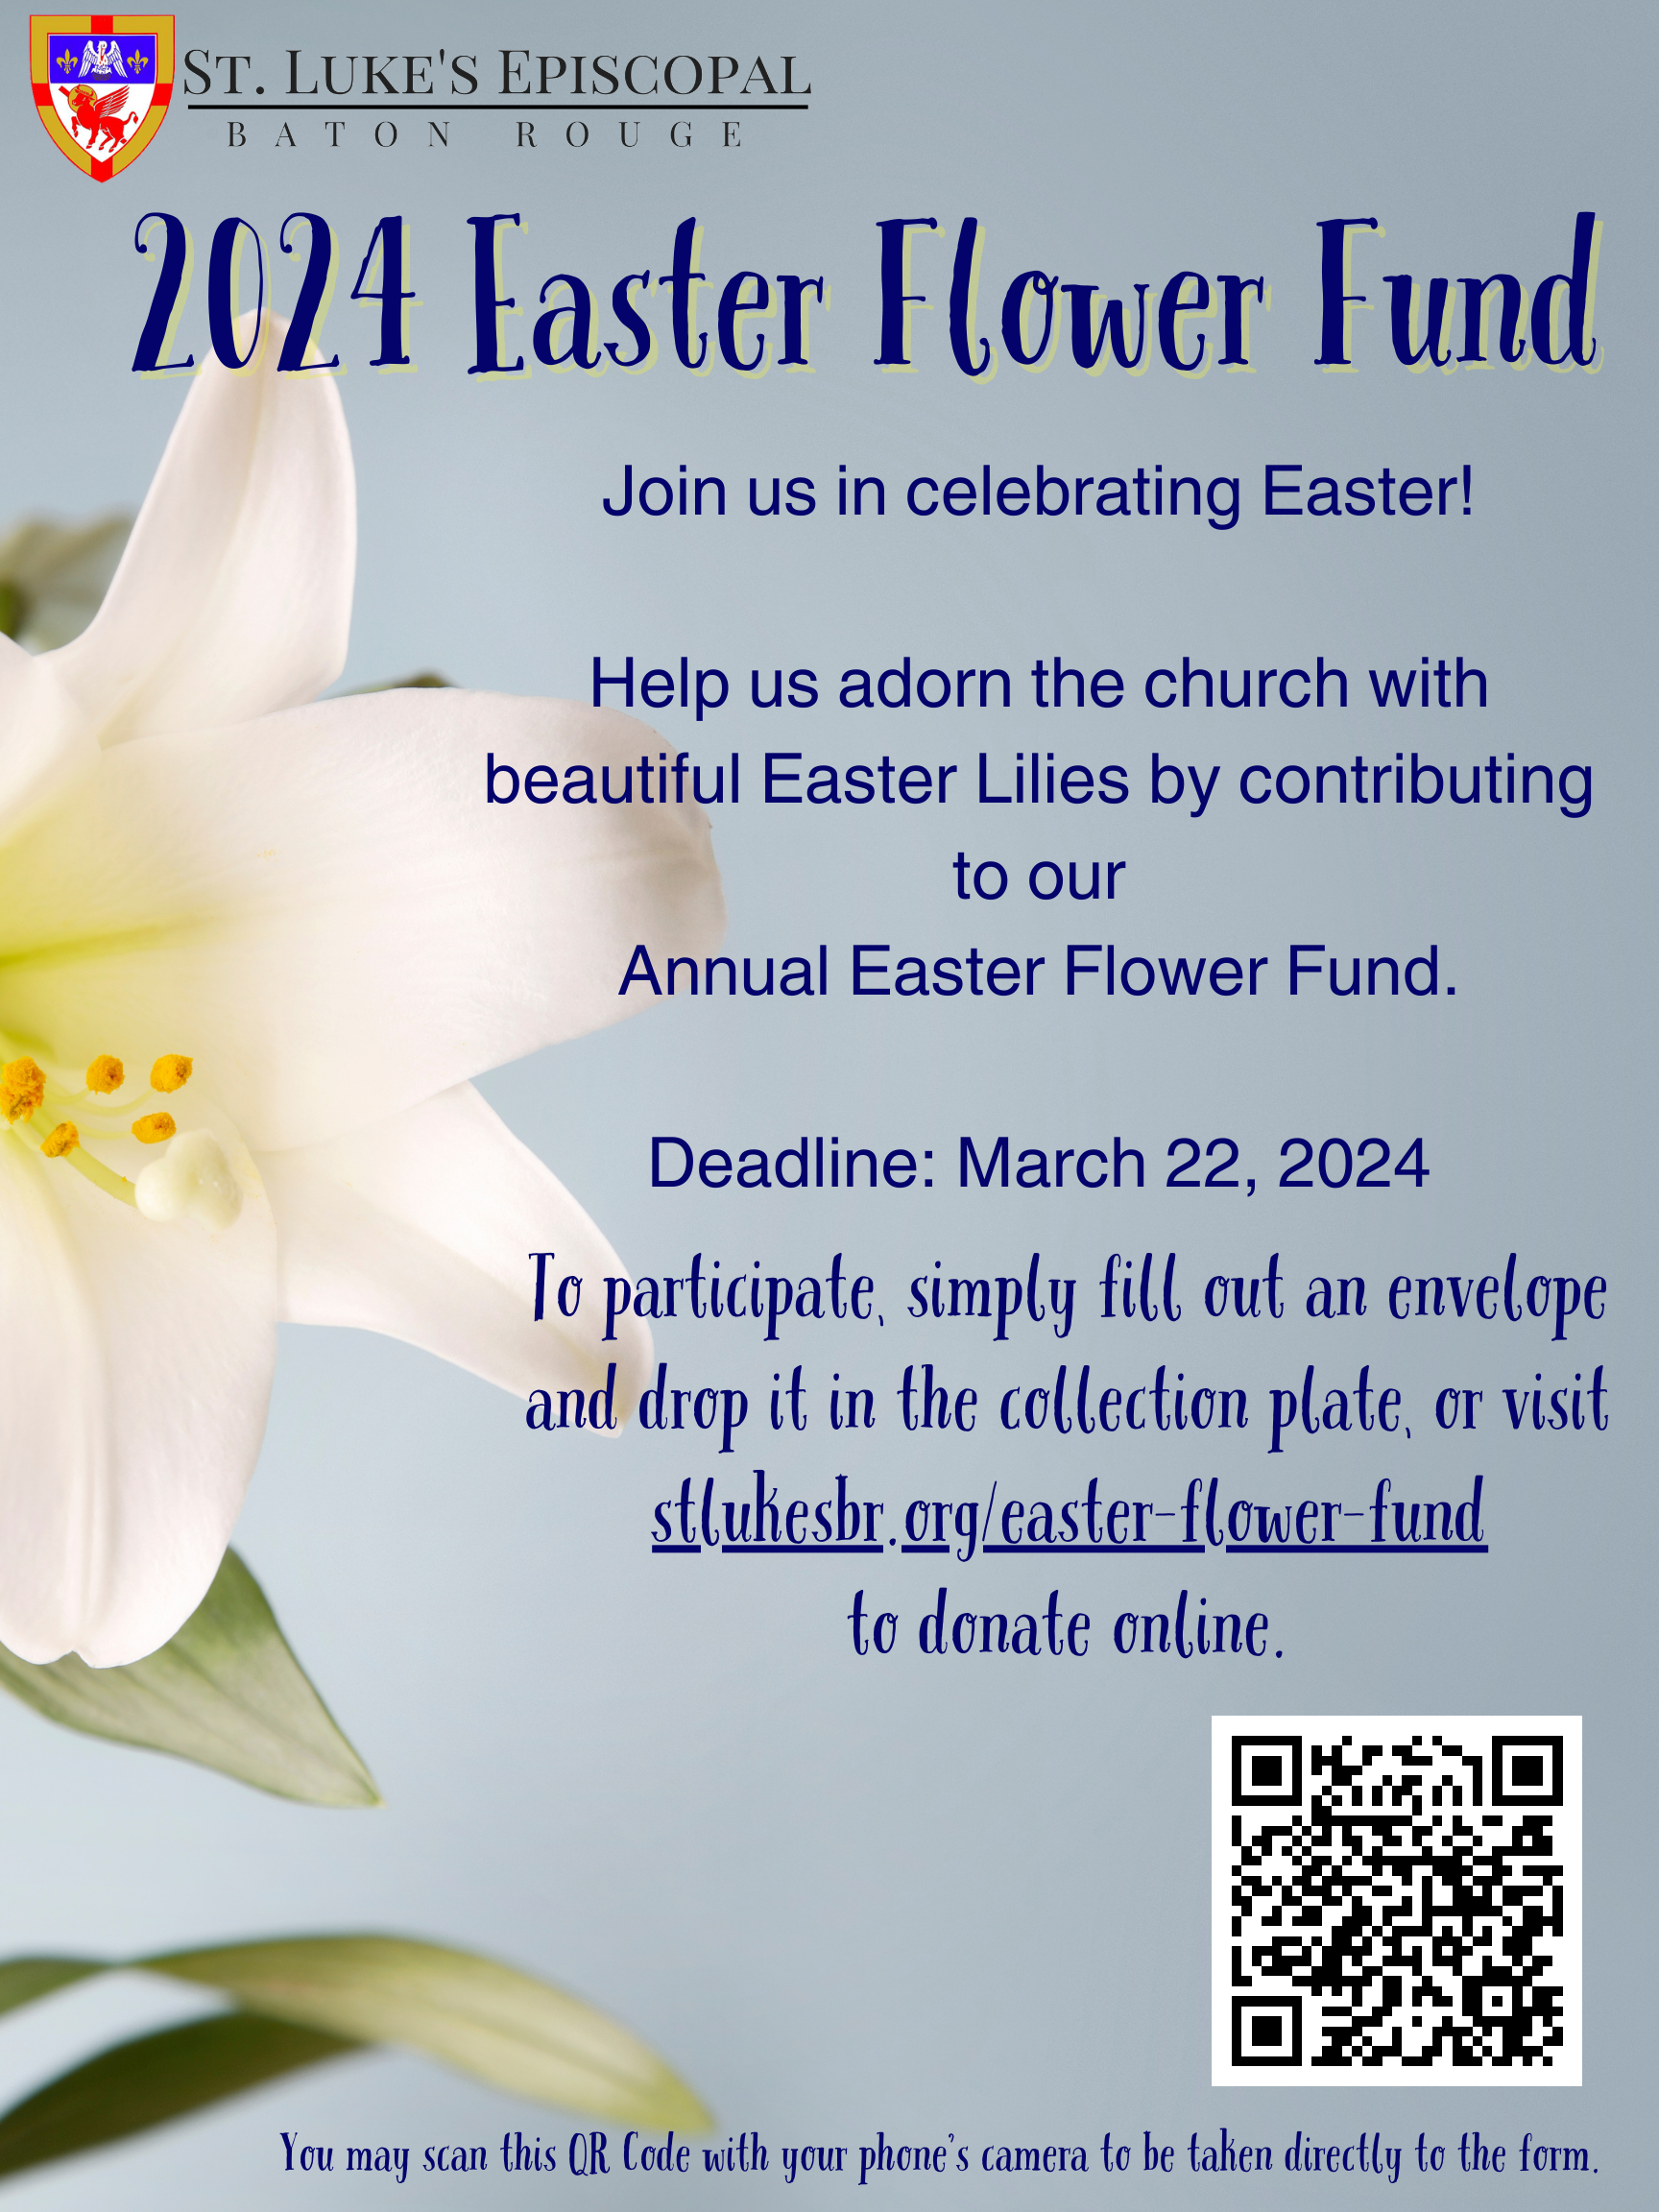 The deadline to participate is March 22, 2024. Please fill out an envelope and place in the collection plate or visit httpswww.stlukesbr.orgeaster-flower-fund if you wish to contribute to the plac